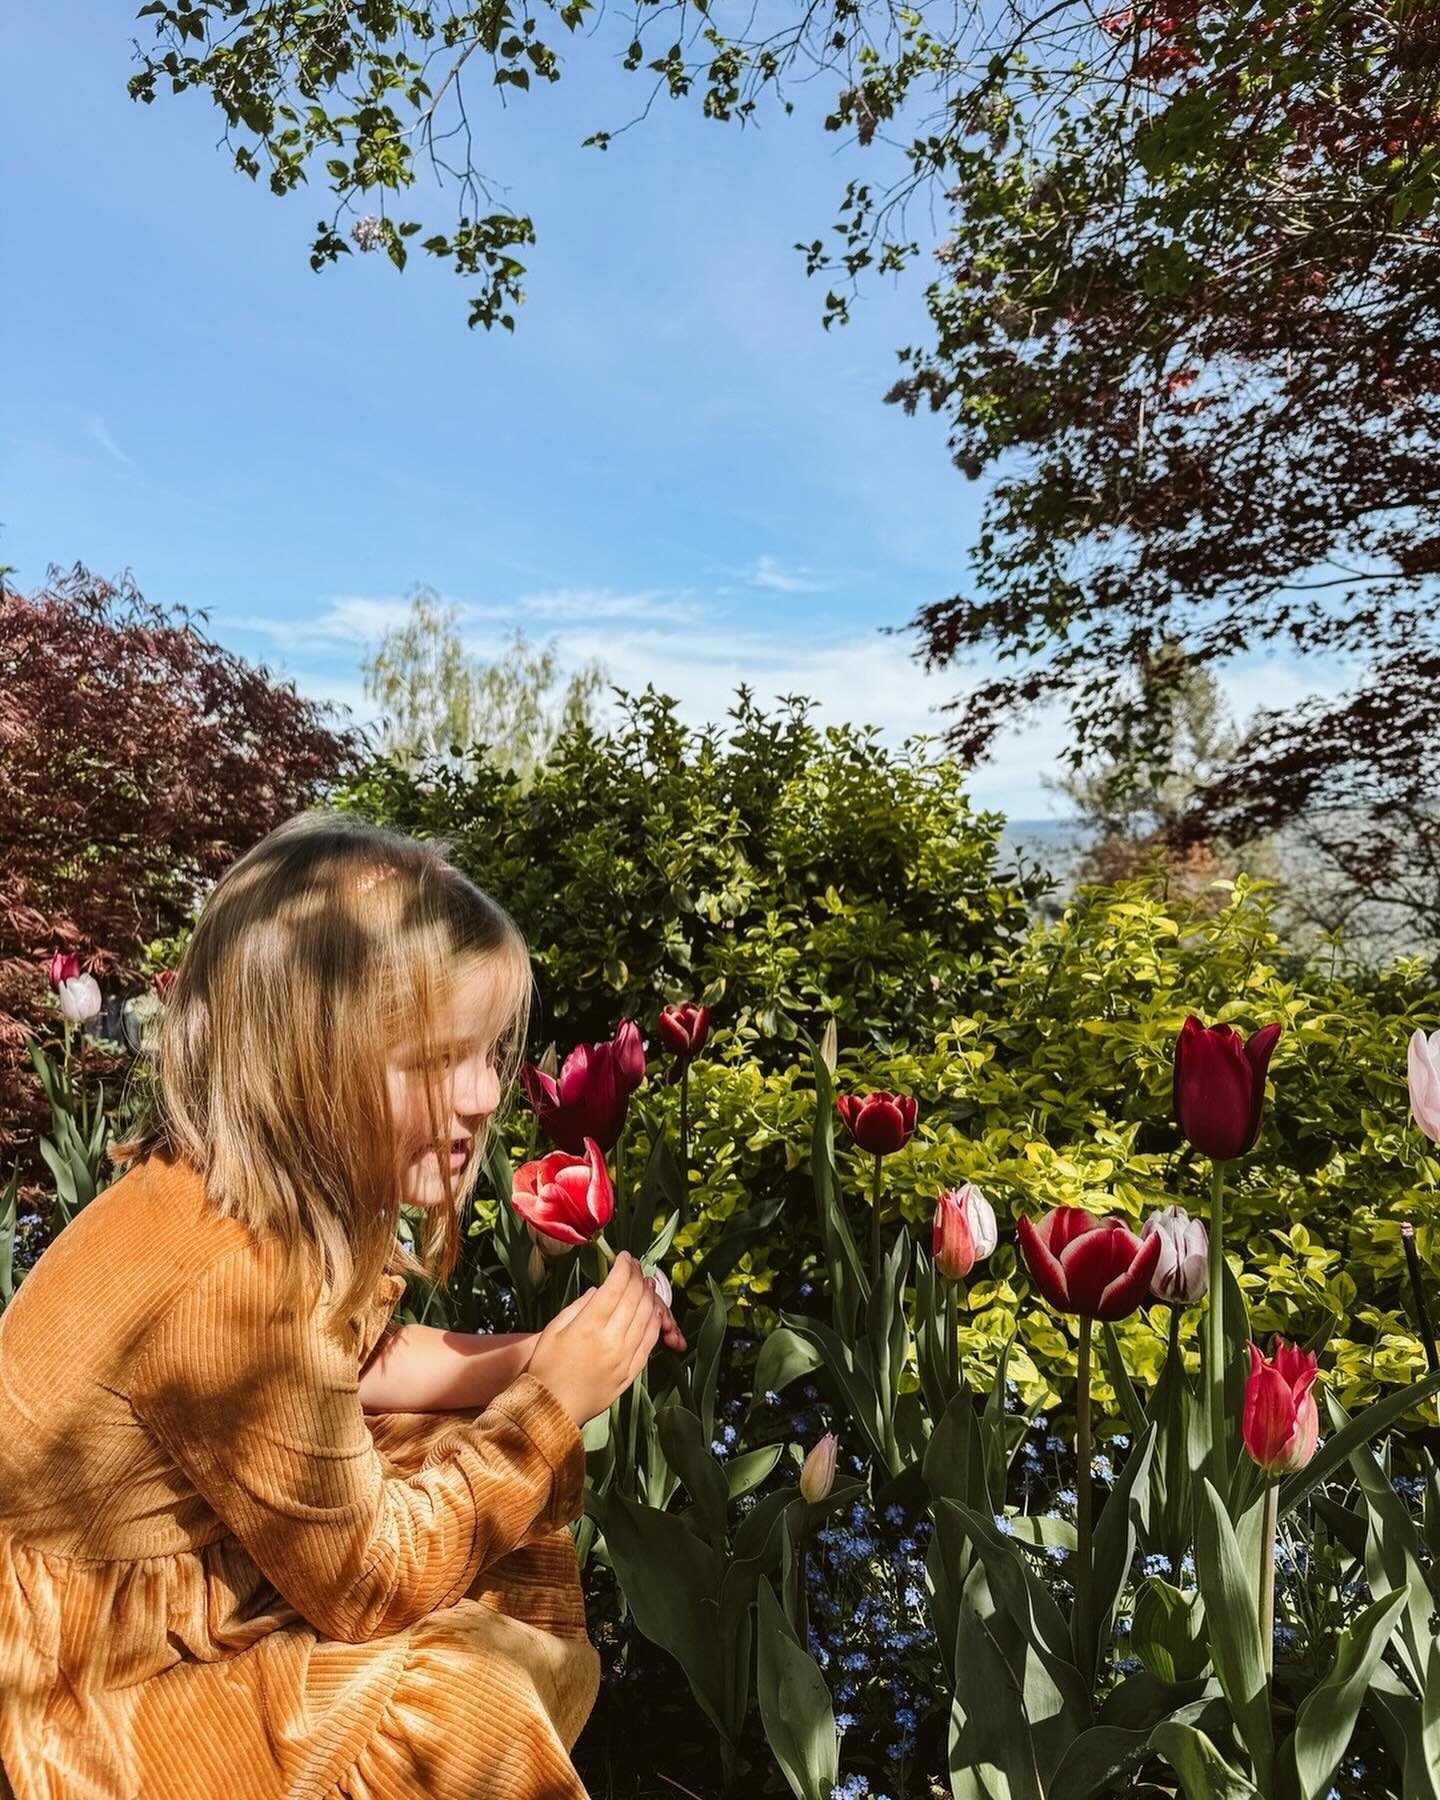 Why we spent 3.5 hours in the car to look at tulips for 45 minutes (and then got frozen yogurt for lunch):
⠀⠀⠀⠀⠀⠀⠀⠀⠀
Because I had no childcare, no meetings, and every problem in my inbox could wait another day. Because Brett was out of town and I wa